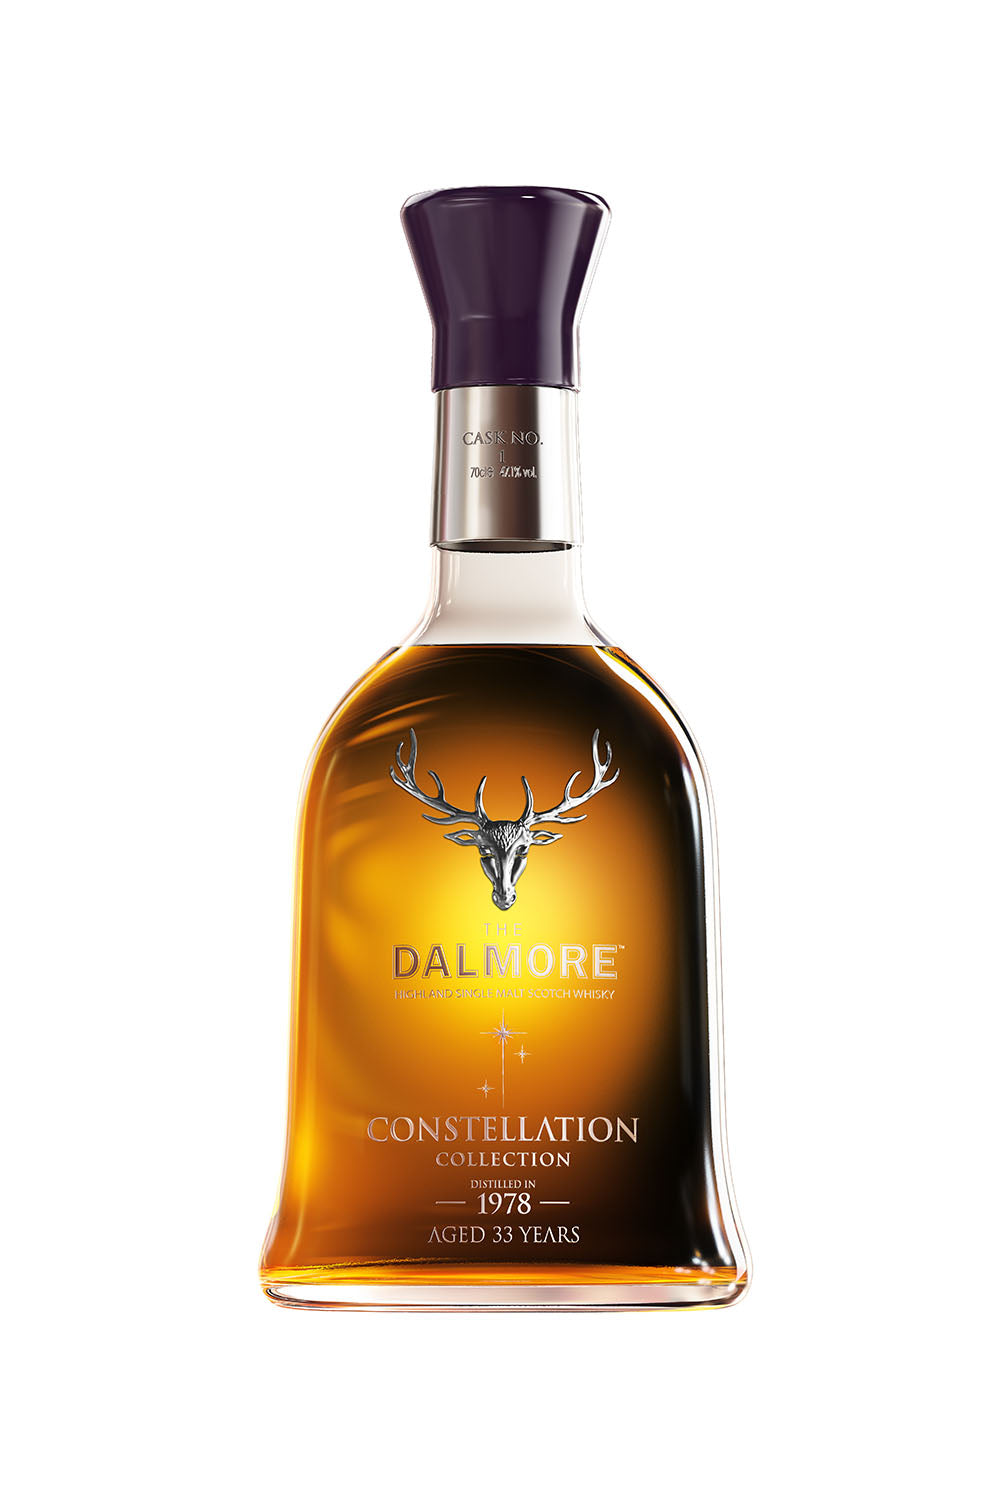 The Dalmore 1978 Constellation - Cask 1